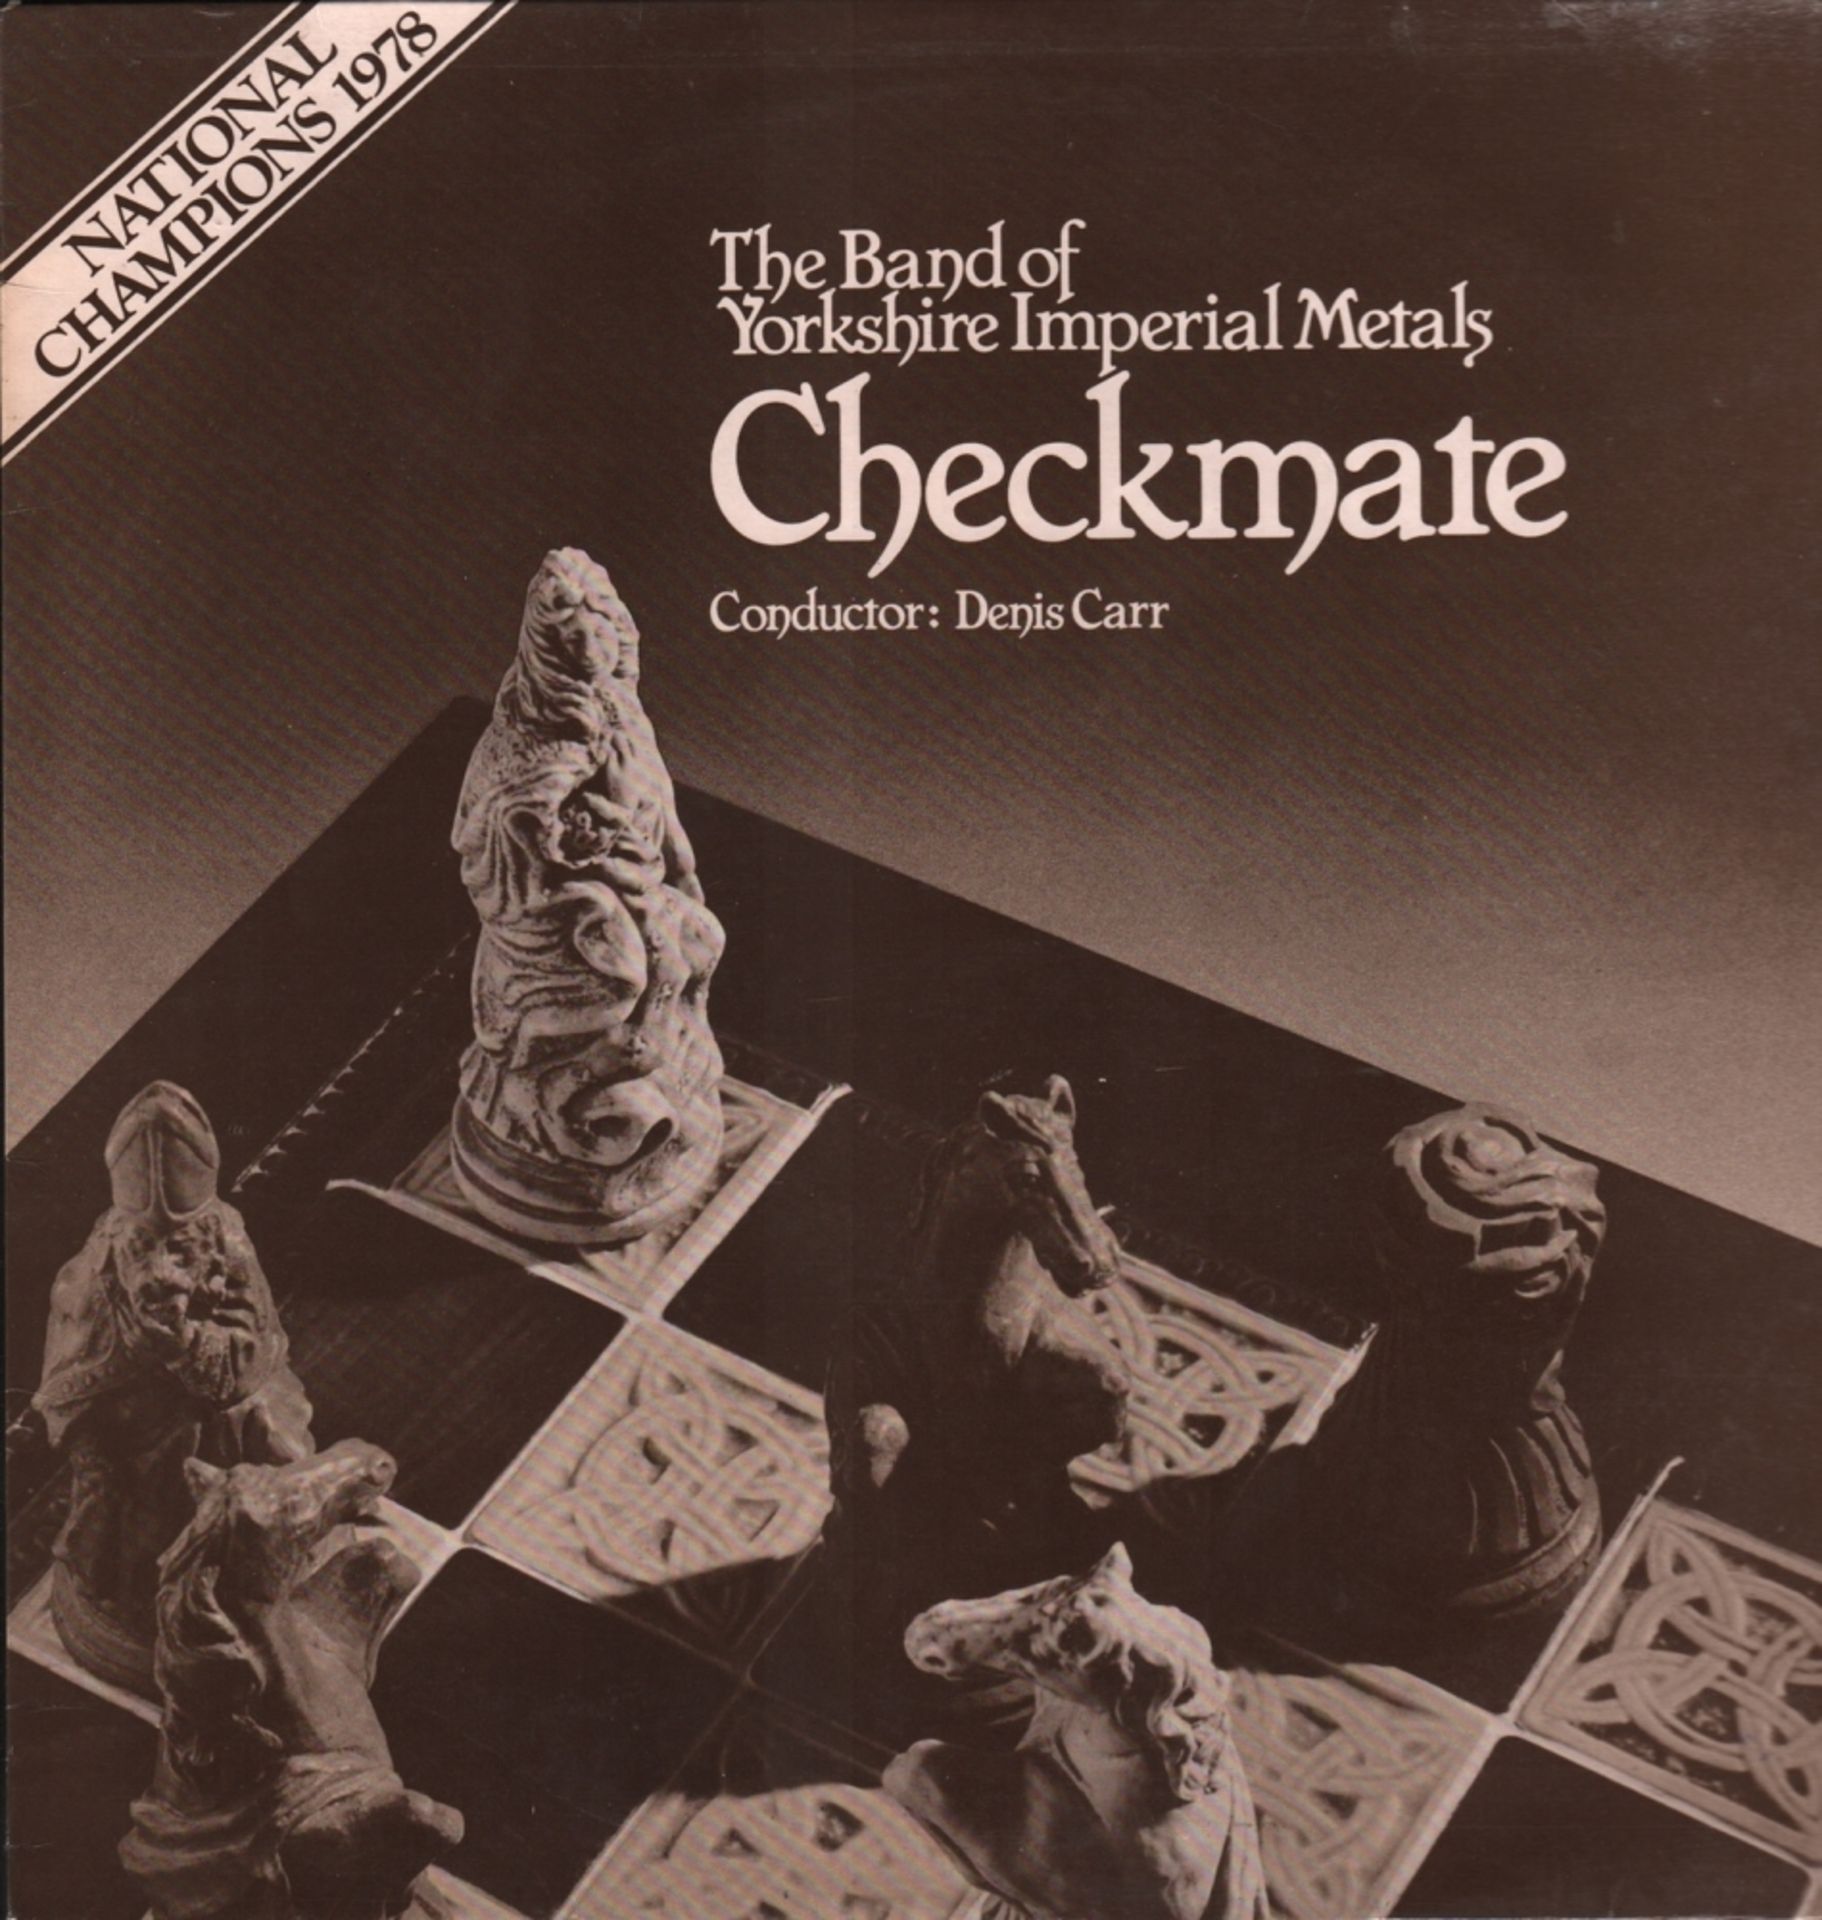 Schallplatte. Checkmate. The Band of Yorkshire Imperial Metals. Conductor: Denis Carr.